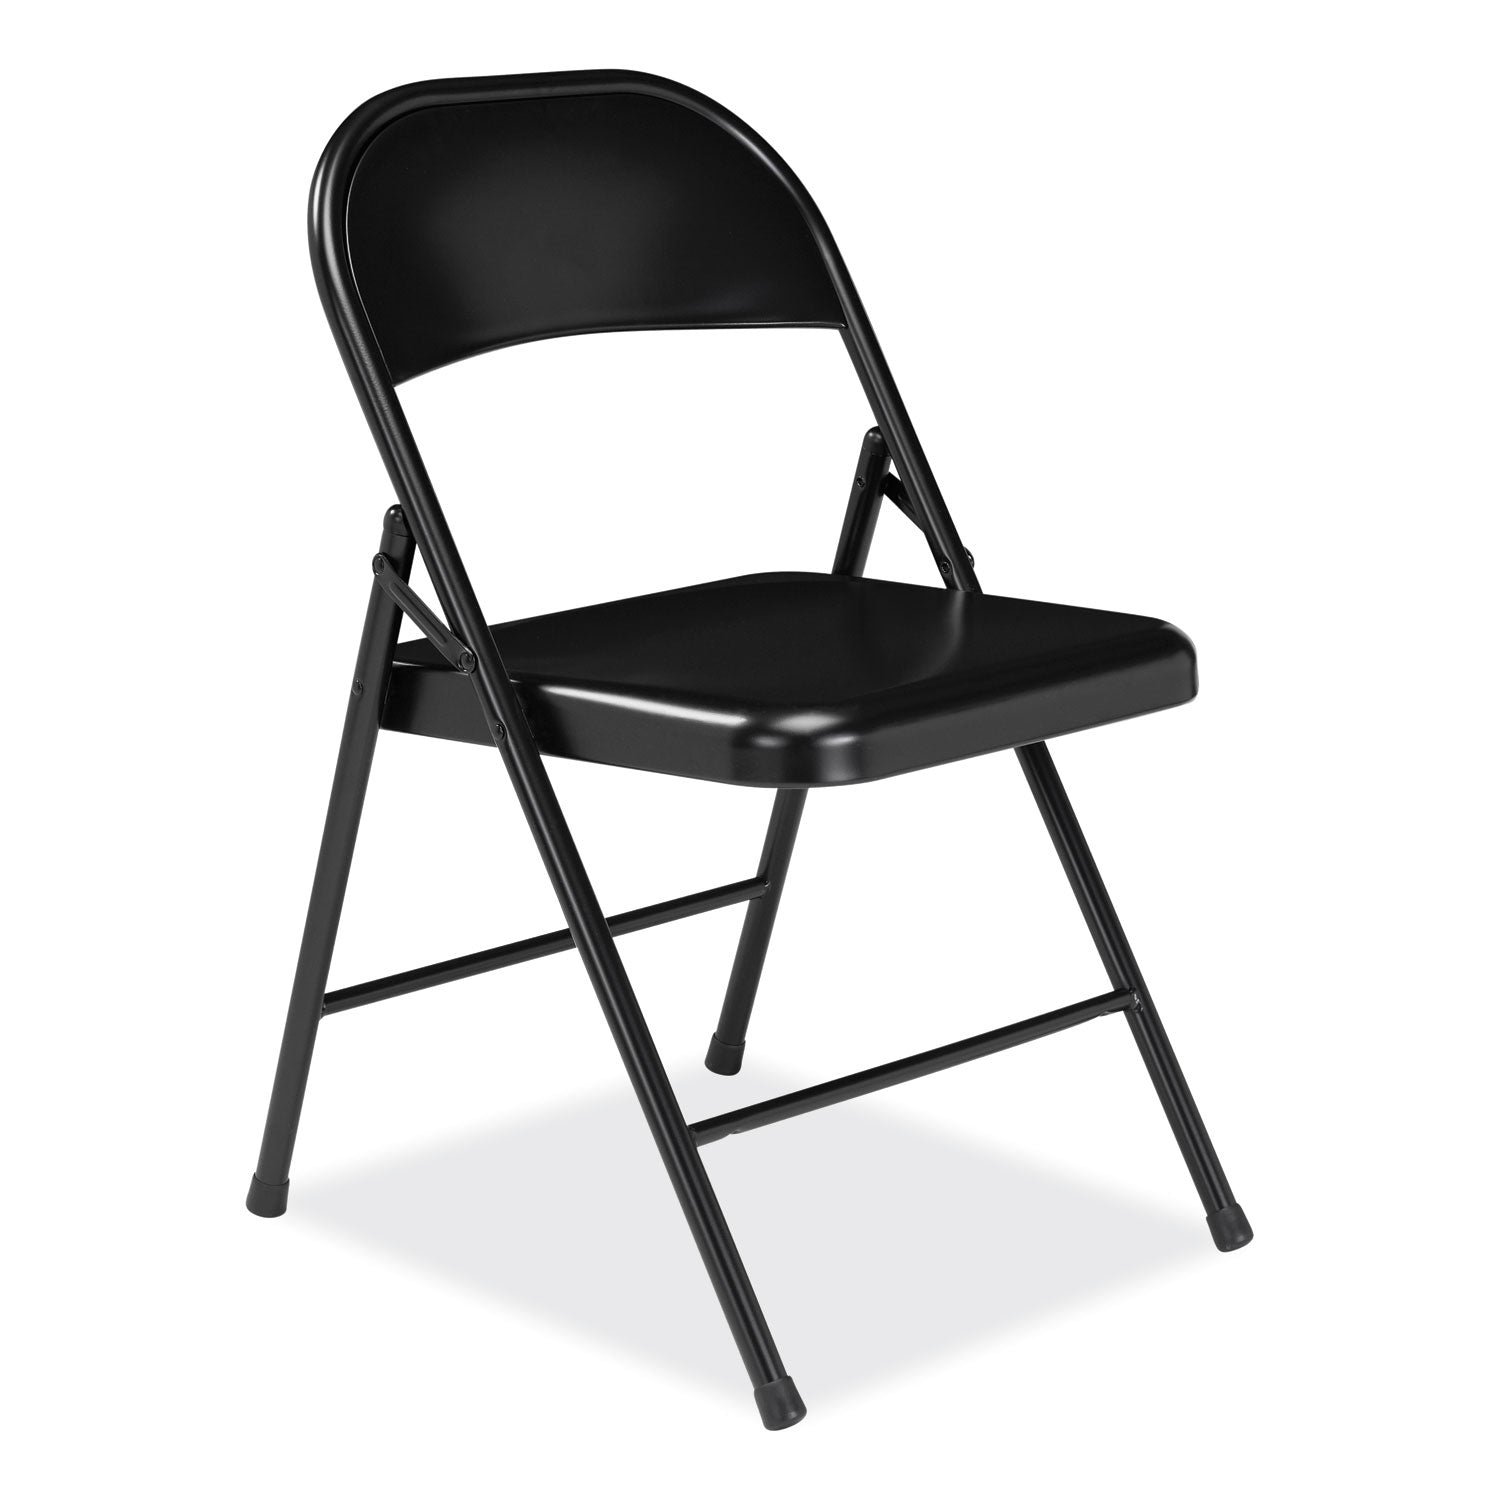 900-series-all-steel-folding-chair-supports-250lb-1775-seat-height-black-seat-back-base-4-ctships-in-1-3-business-days_nps910 - 2